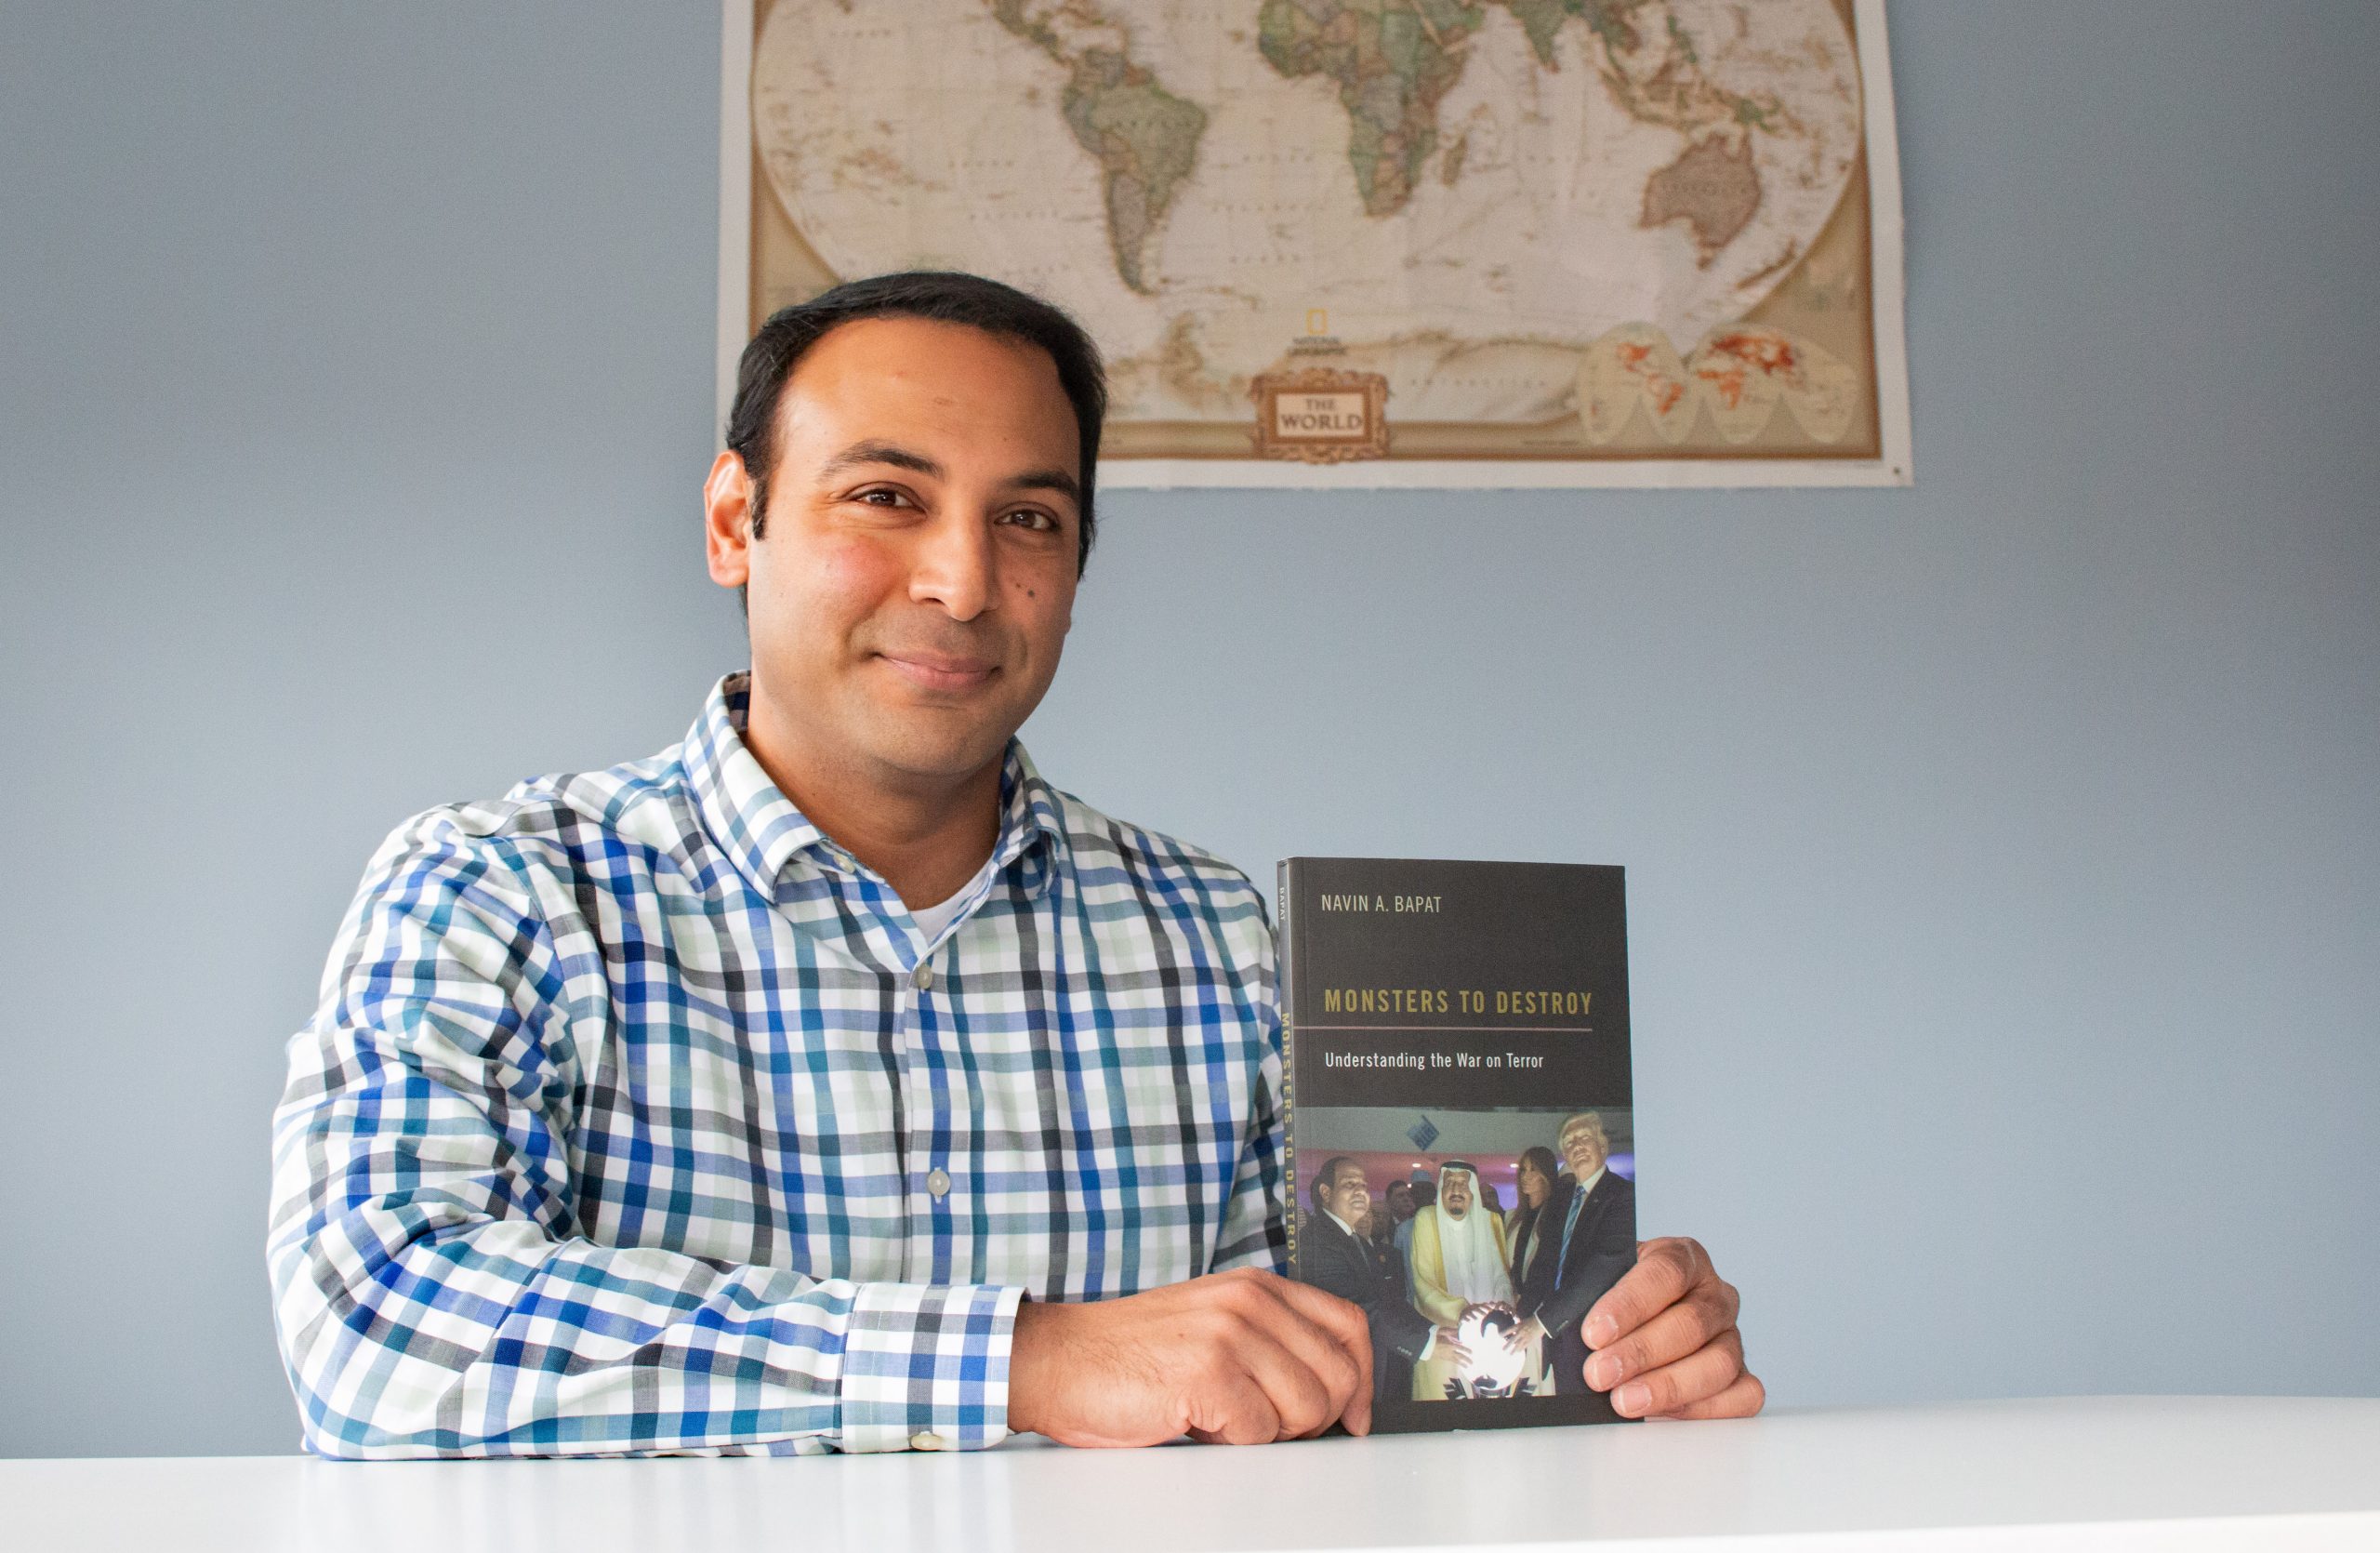 Navin Bapat holds a copy of his book, "Monsters to Destroy." (photo by Kristen Chavez)